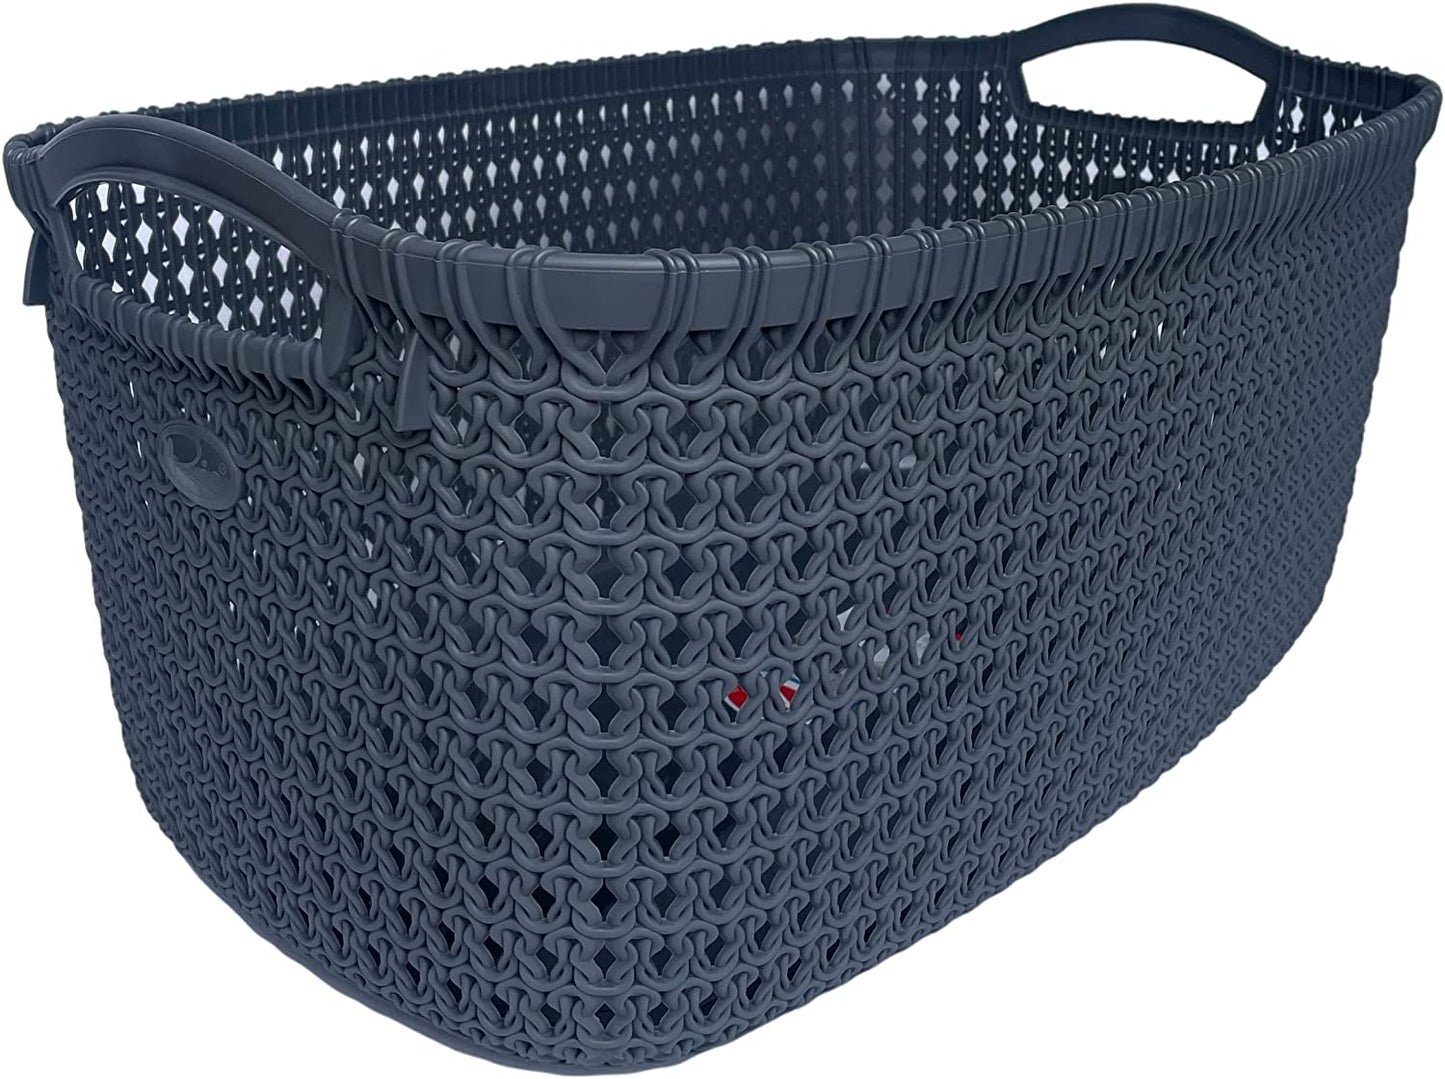 30 Litre Washing Laundry Basket with Handles Rattan Style